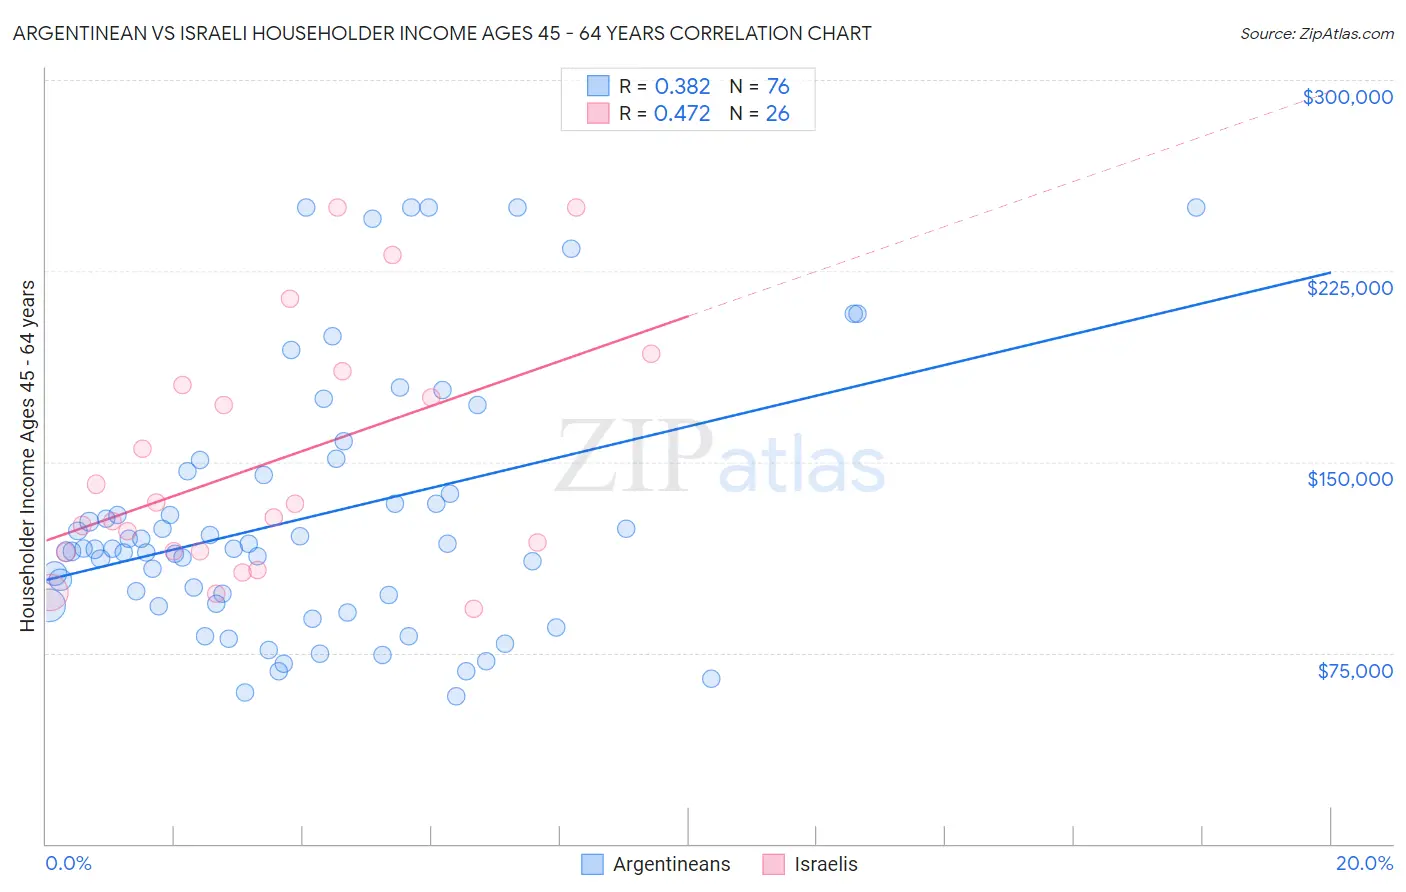 Argentinean vs Israeli Householder Income Ages 45 - 64 years